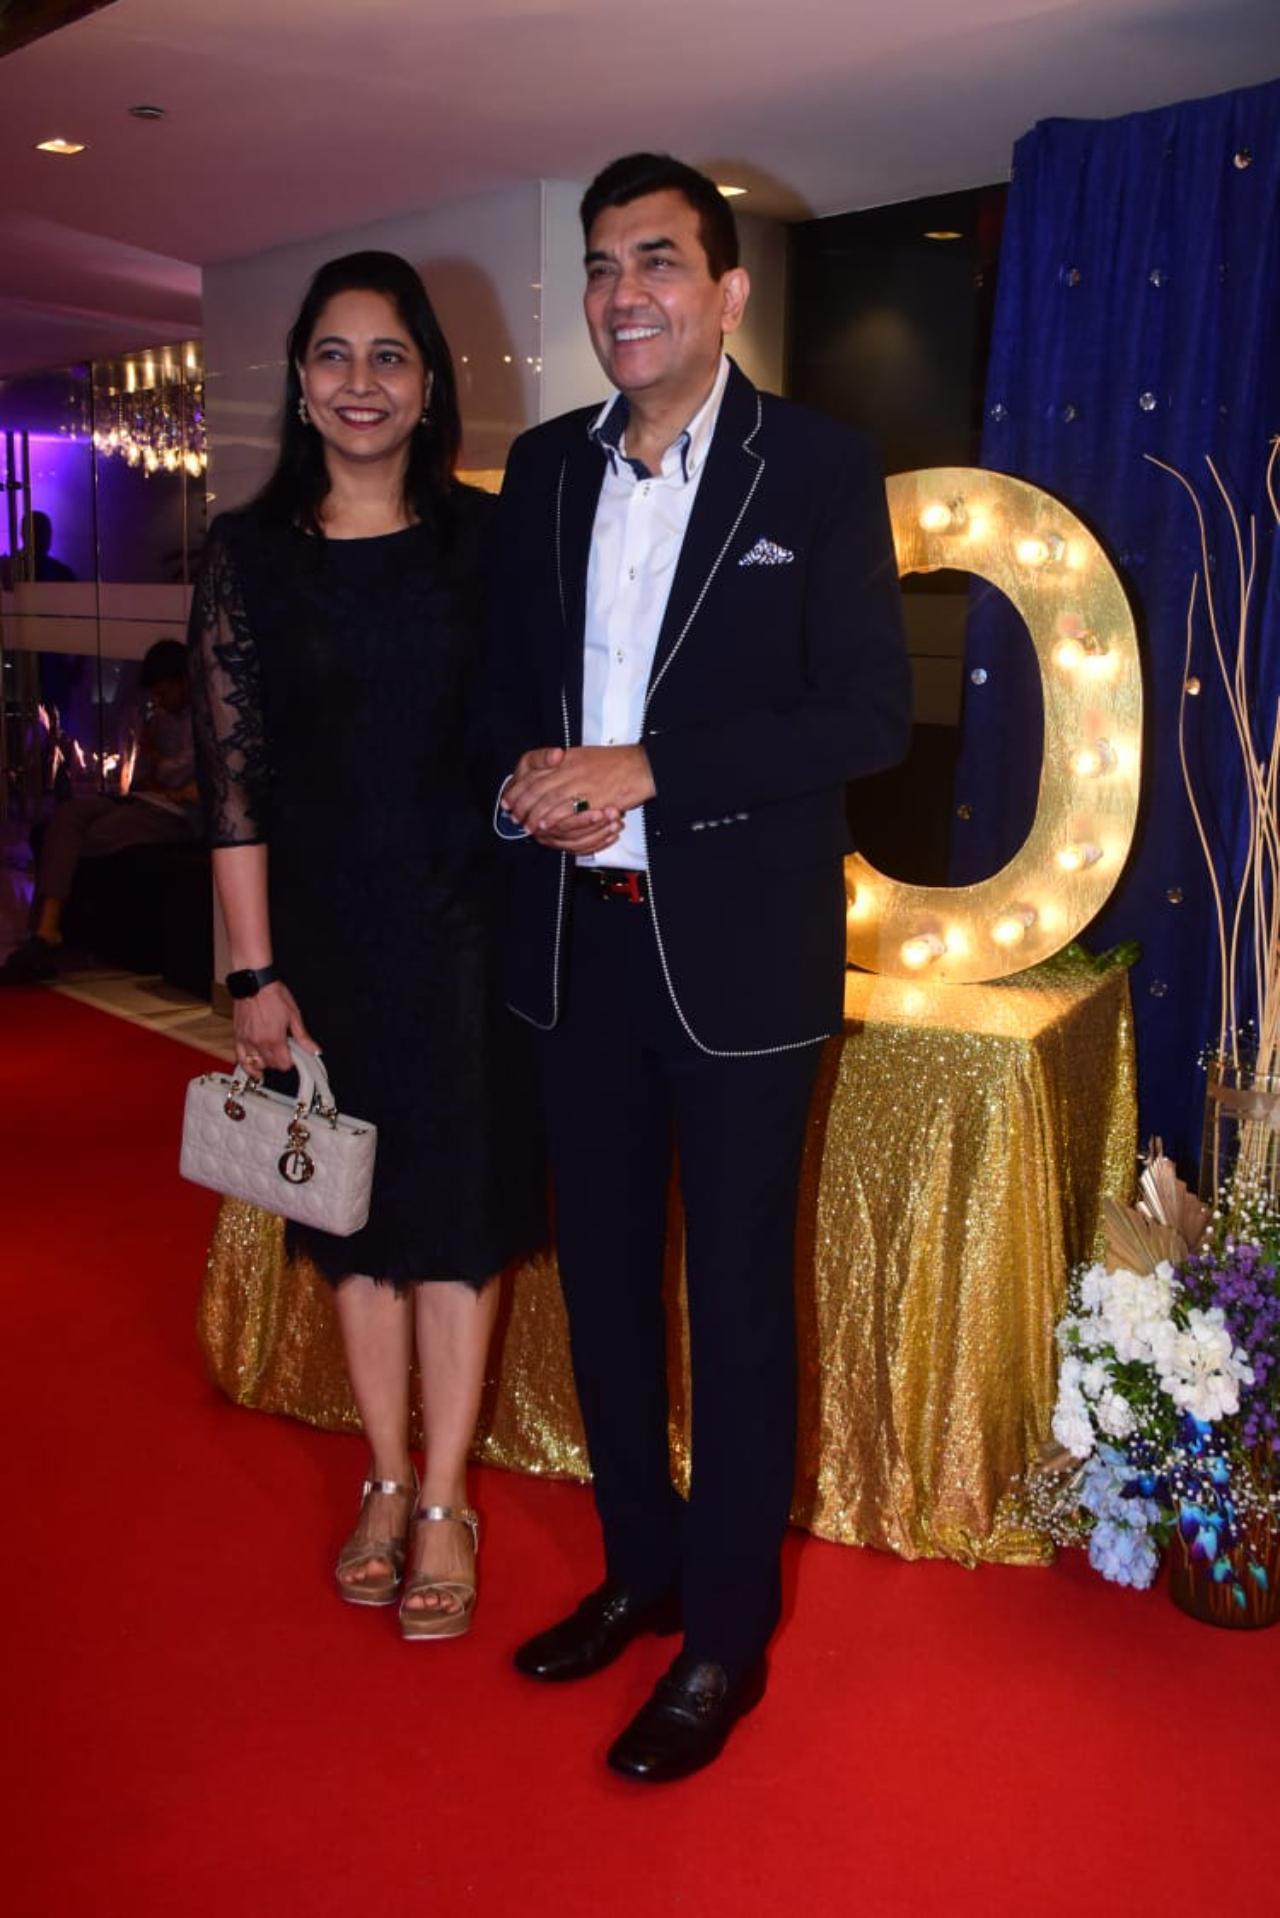 Sonu Nigam's friends extend beyond the realm of entertainment and music. Khaana Khazana masterchef Sanjeev Kapoor attended the birthday bash along with his wife Alyona Kapoor. It wouldn't be surprising if the acclaimed chef whipped up a surprise something for Sonu!